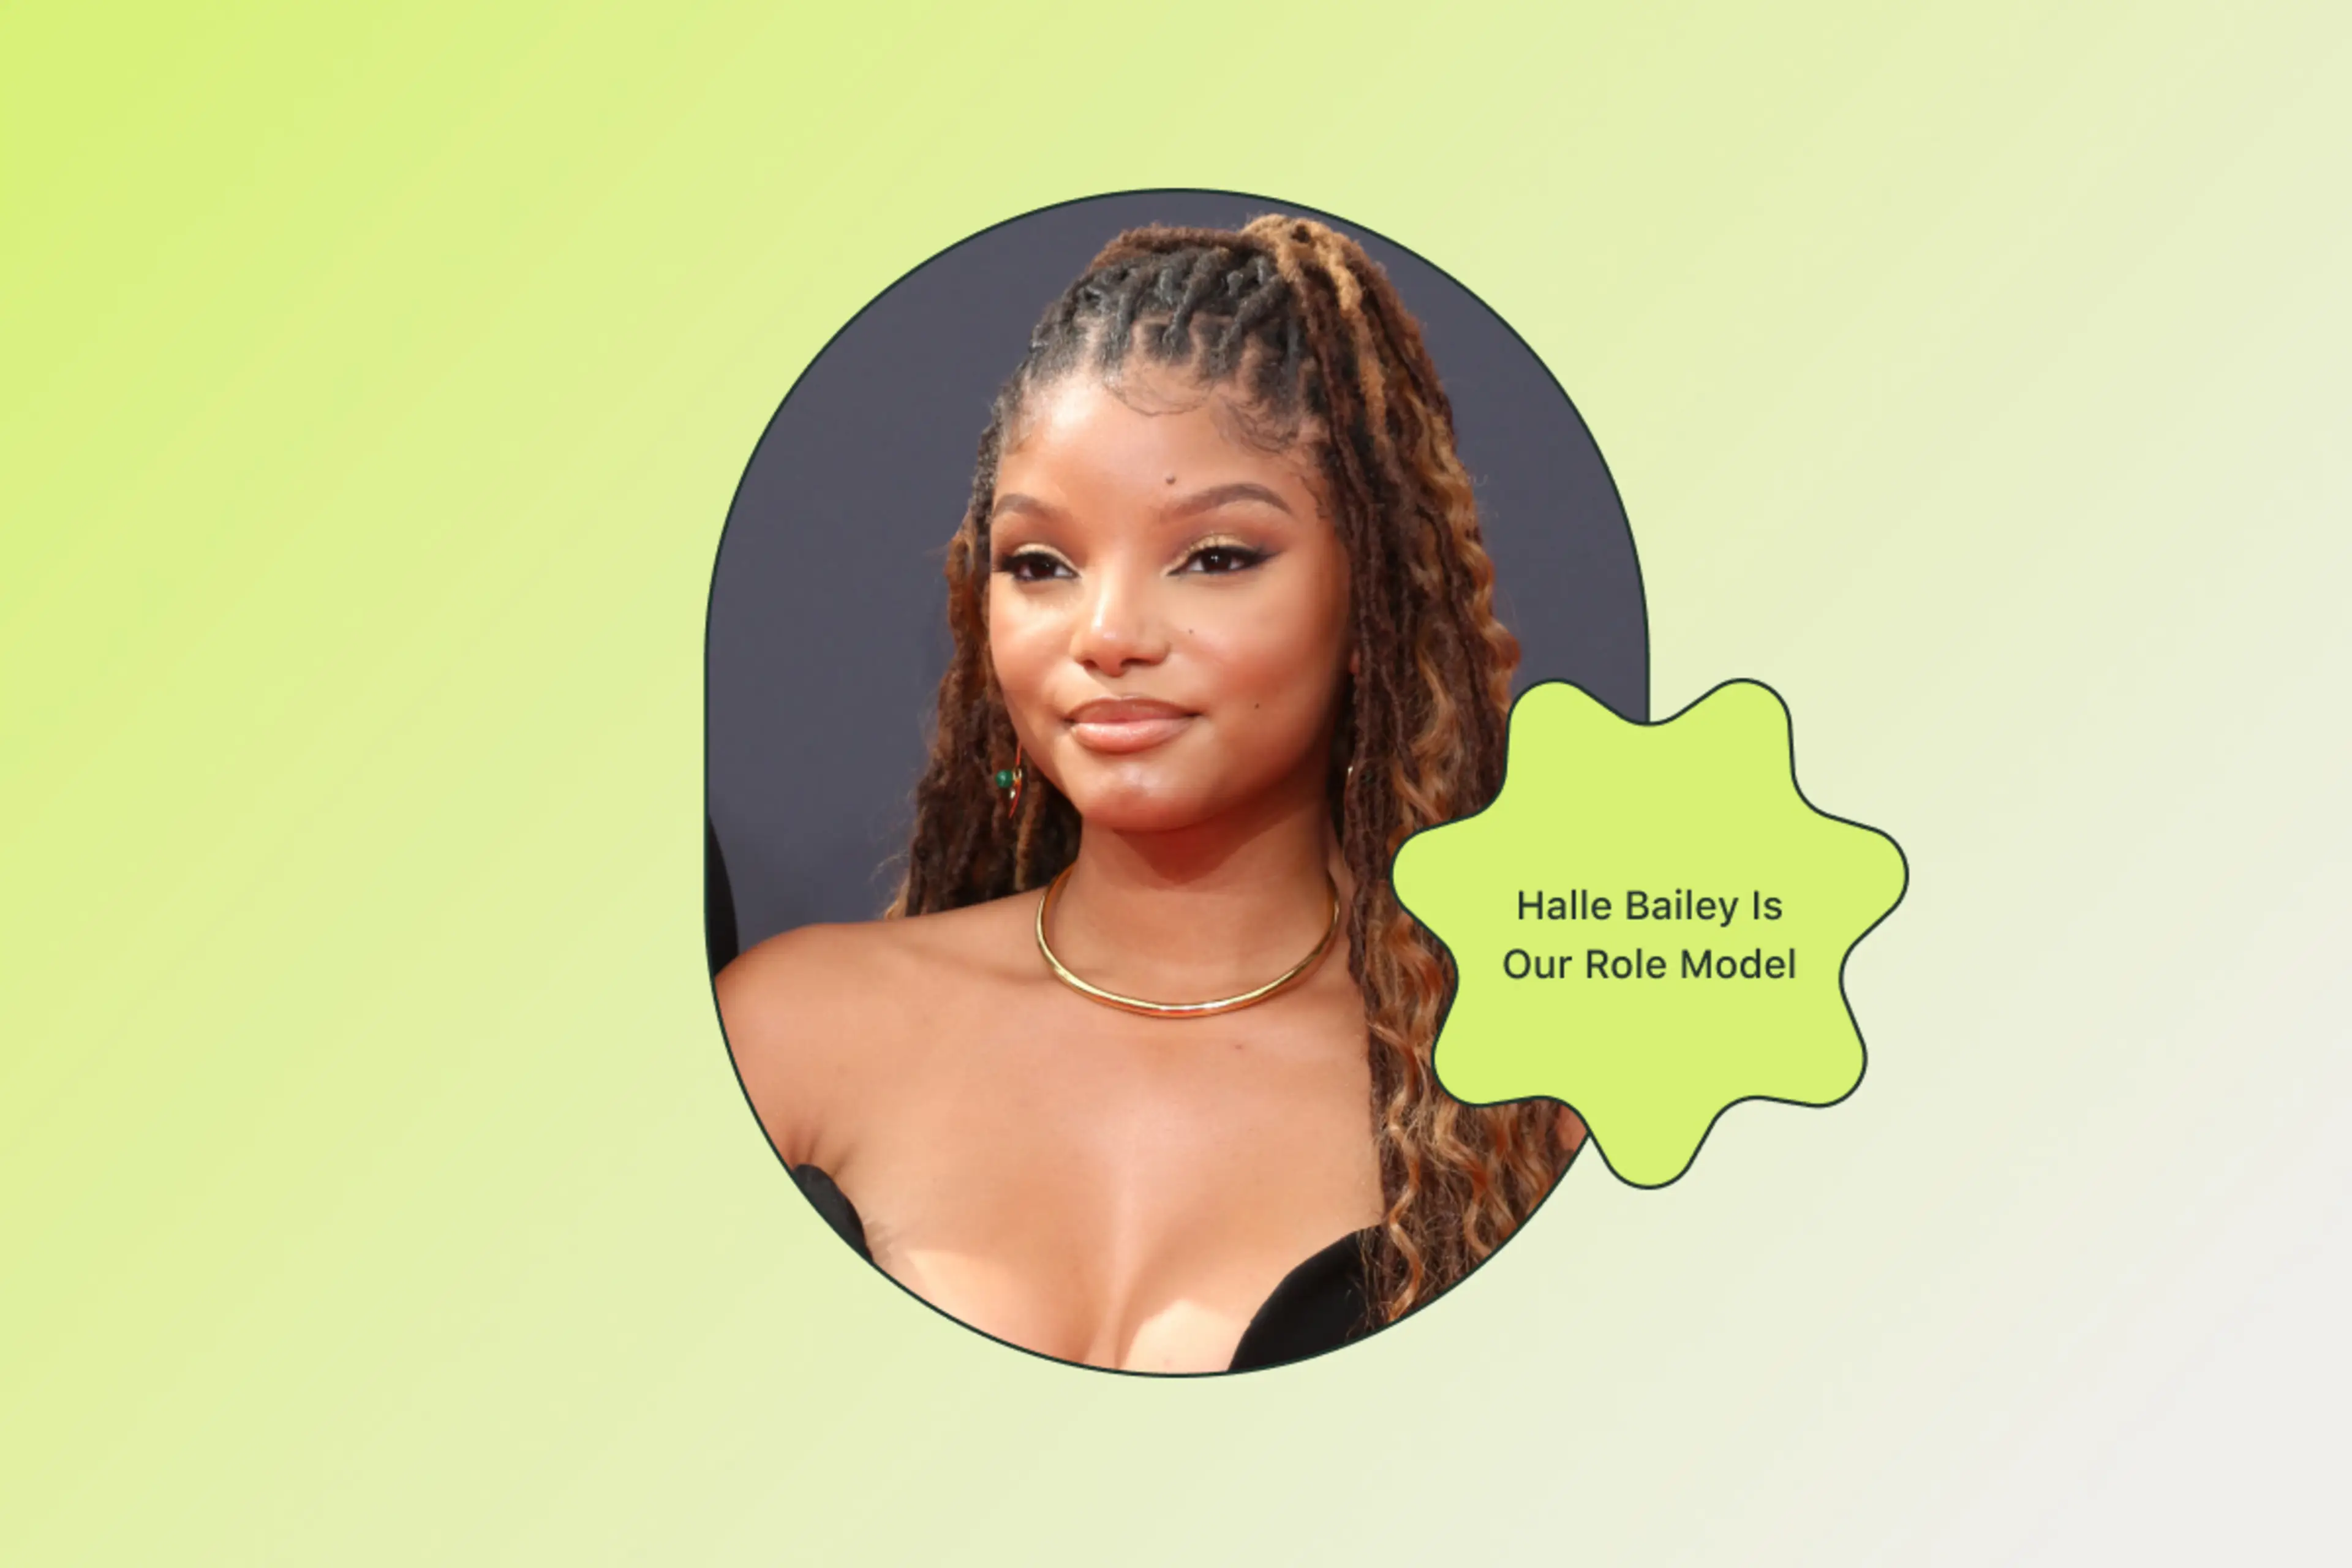 How Halle Bailey’s (Lack of a) Pregnancy Announcement Has Empowered Us